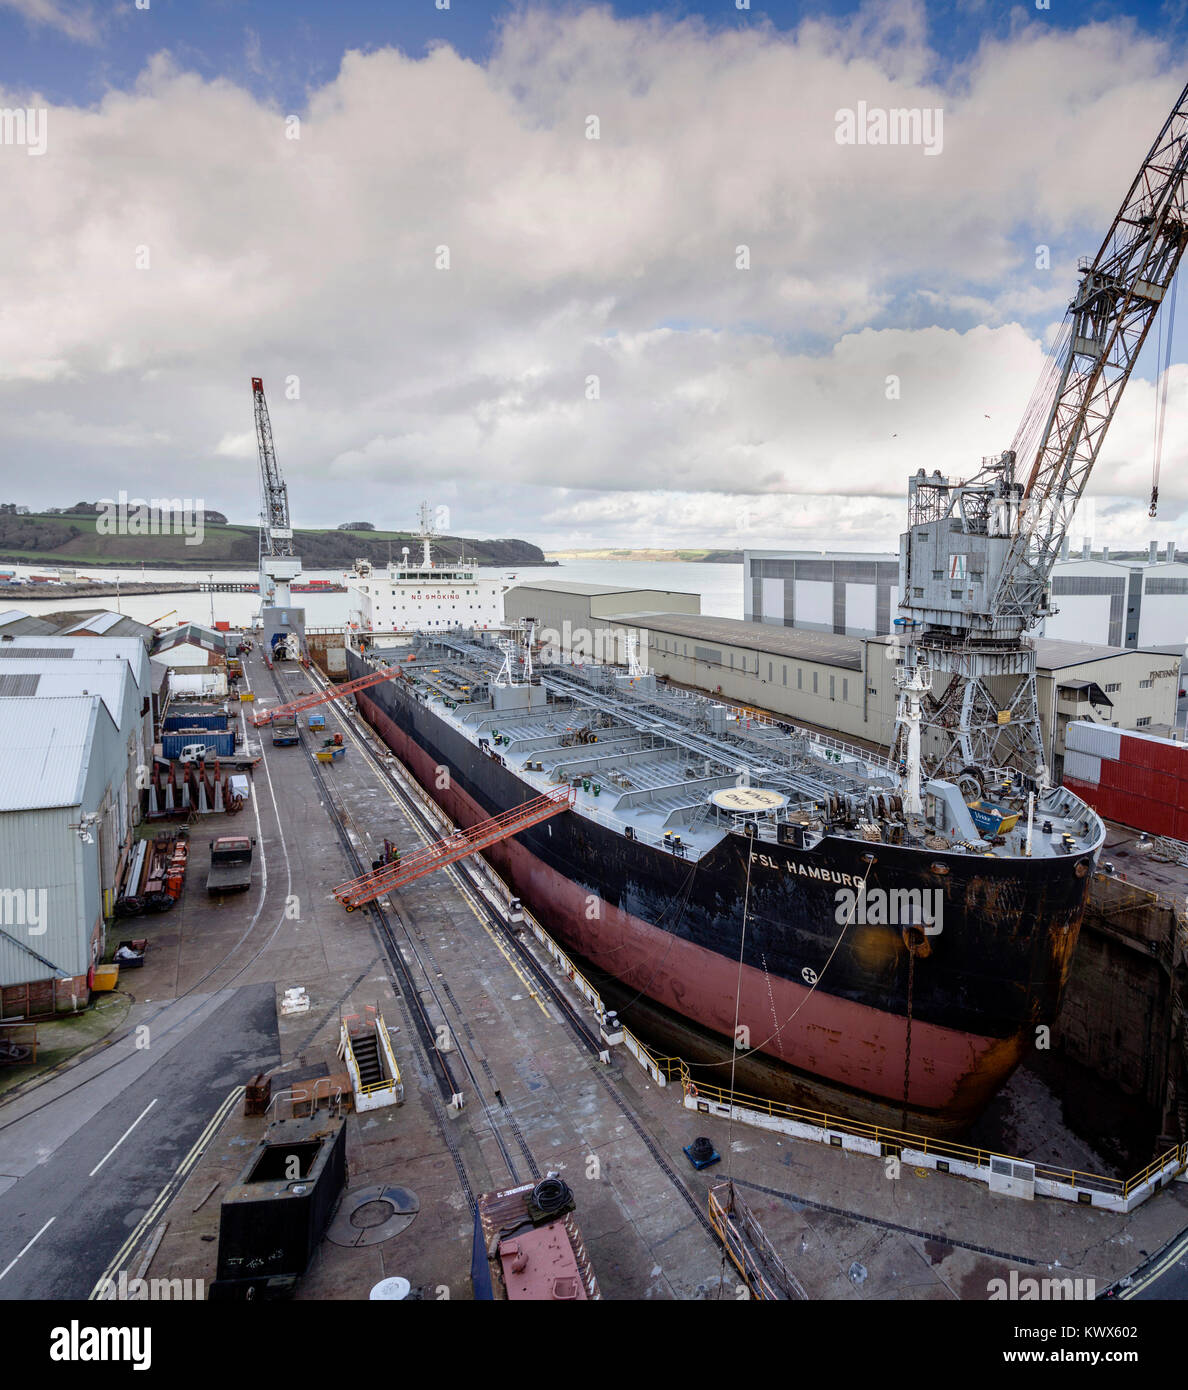 Falmouth Dry Docks - photographed from trhe public road.  Falmouth’s three graving docks provide up to 100,000 dwt dry dock capacity,. Stock Photo